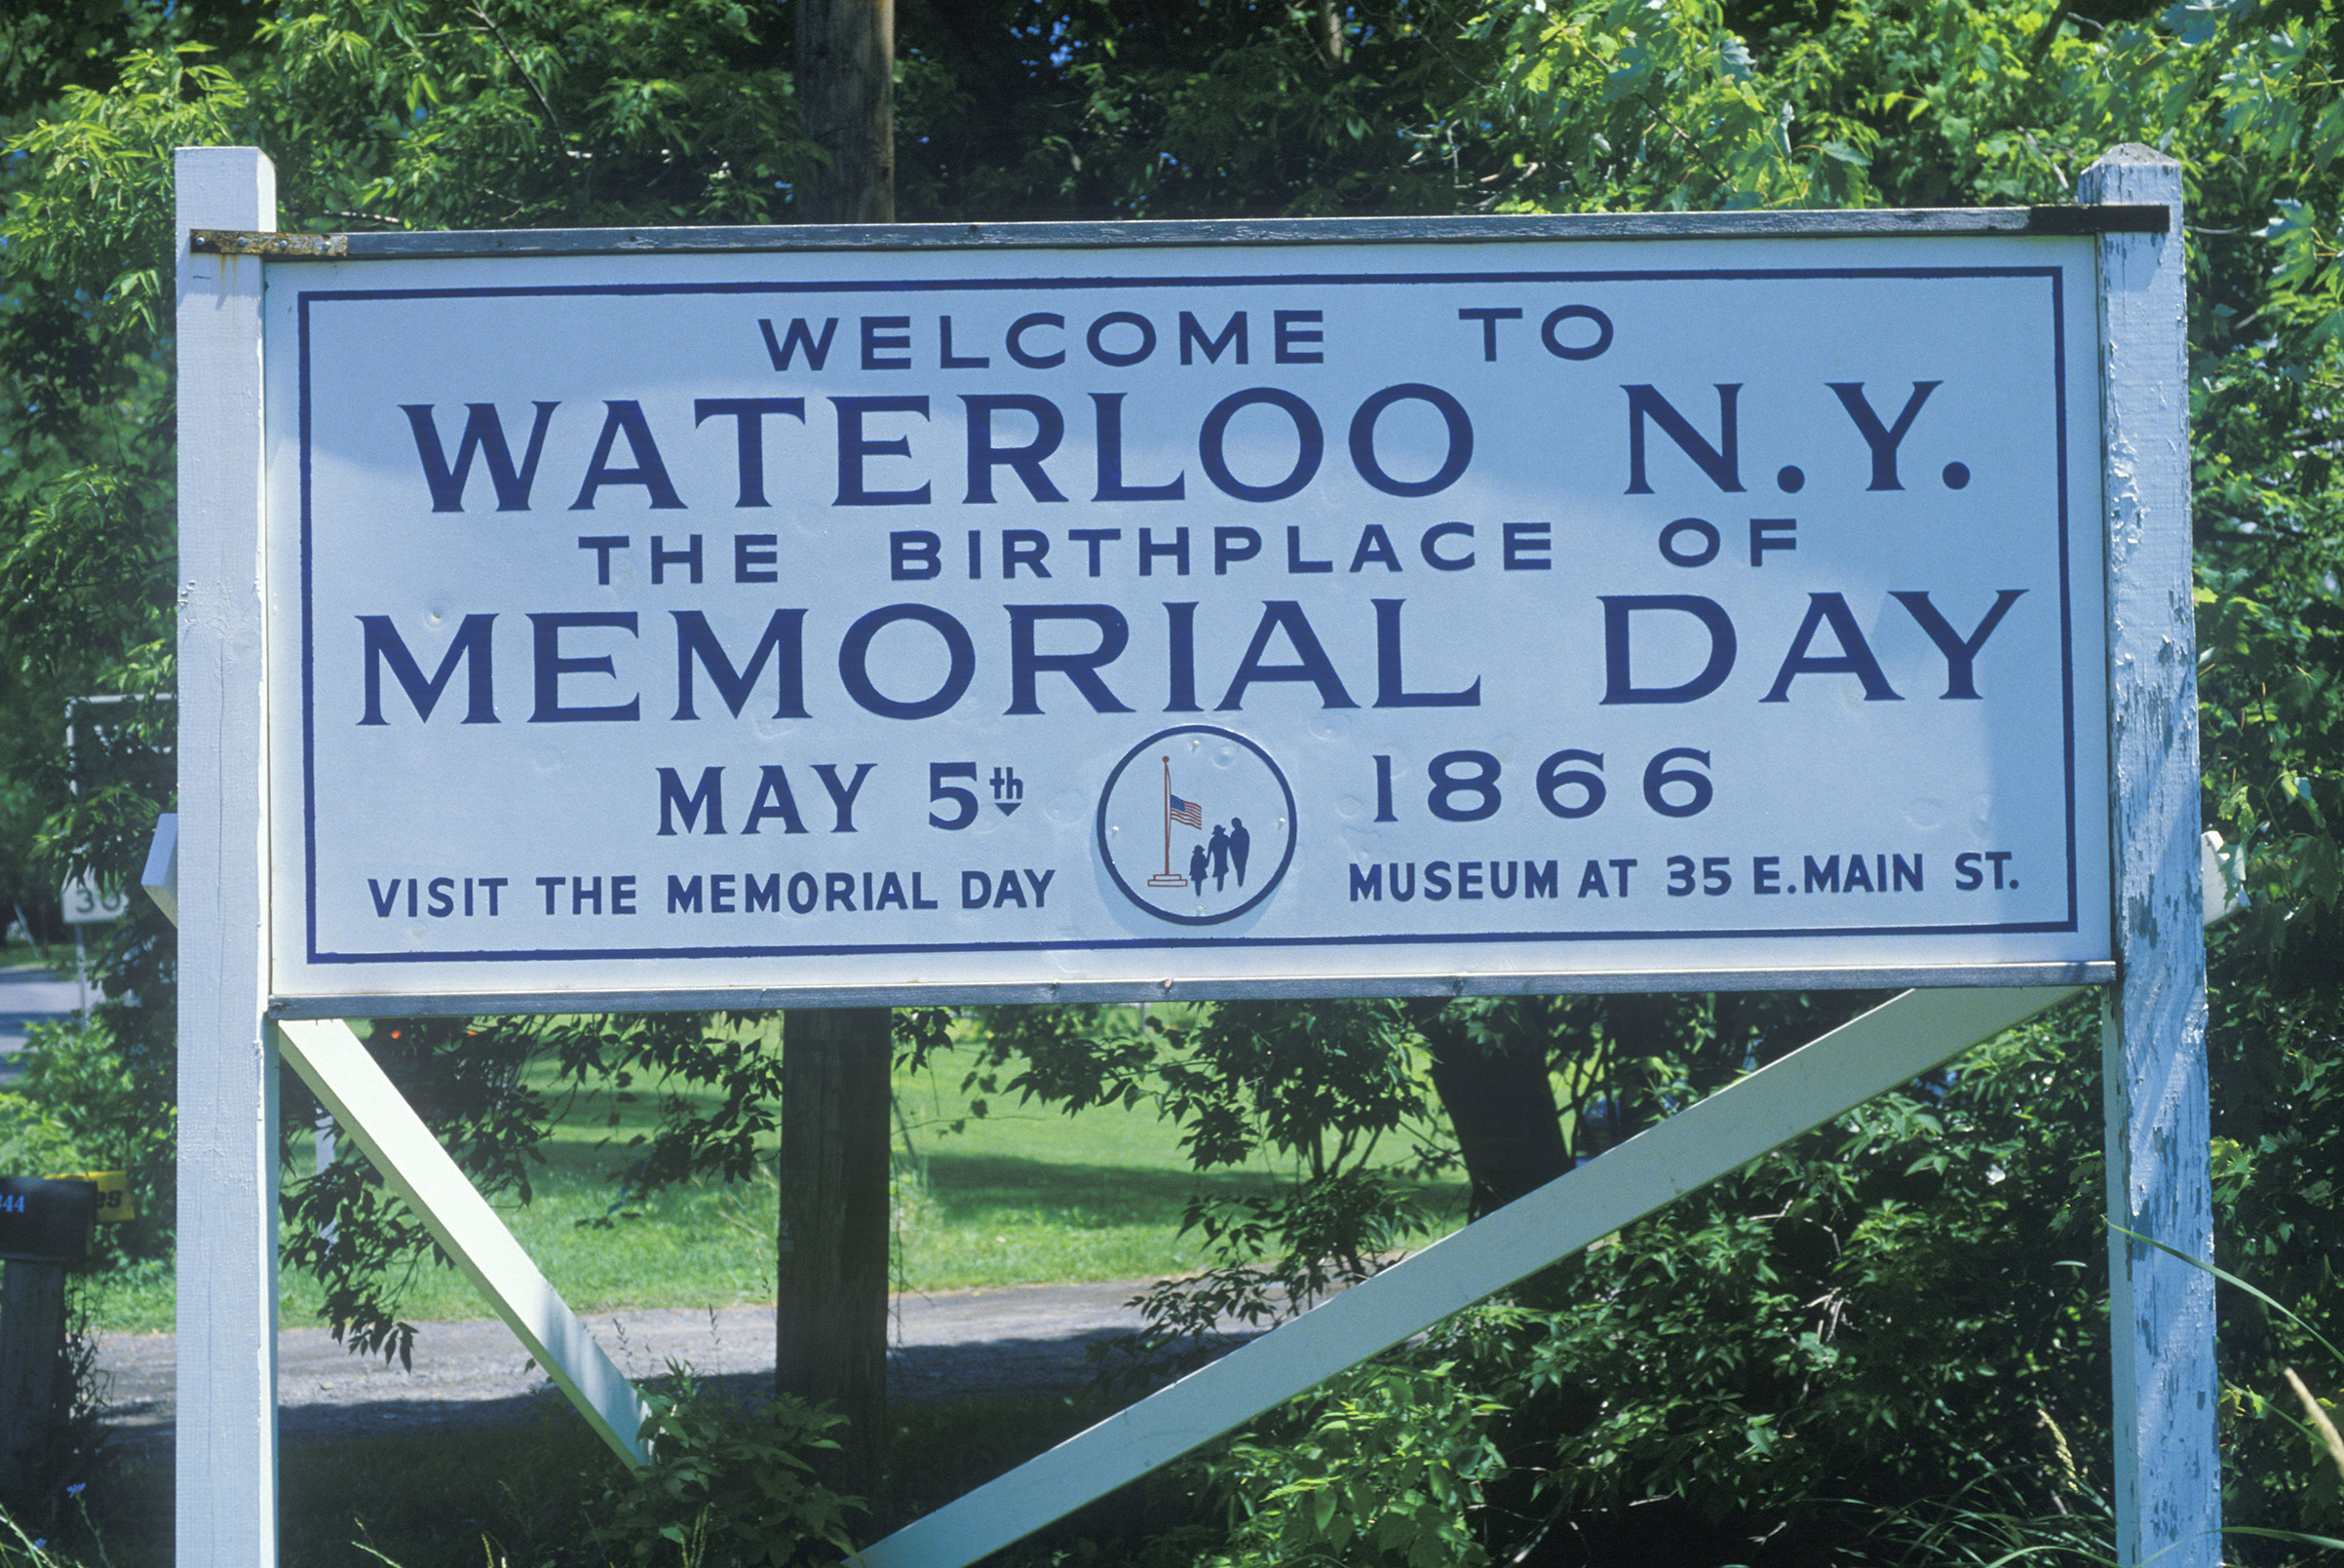 Waterloo, N.Y. has claimed to be the birthplace of Memorial Day. But evidence suggests the holiday's origins are further south. (Stock Connection/REX/Shutterstock)